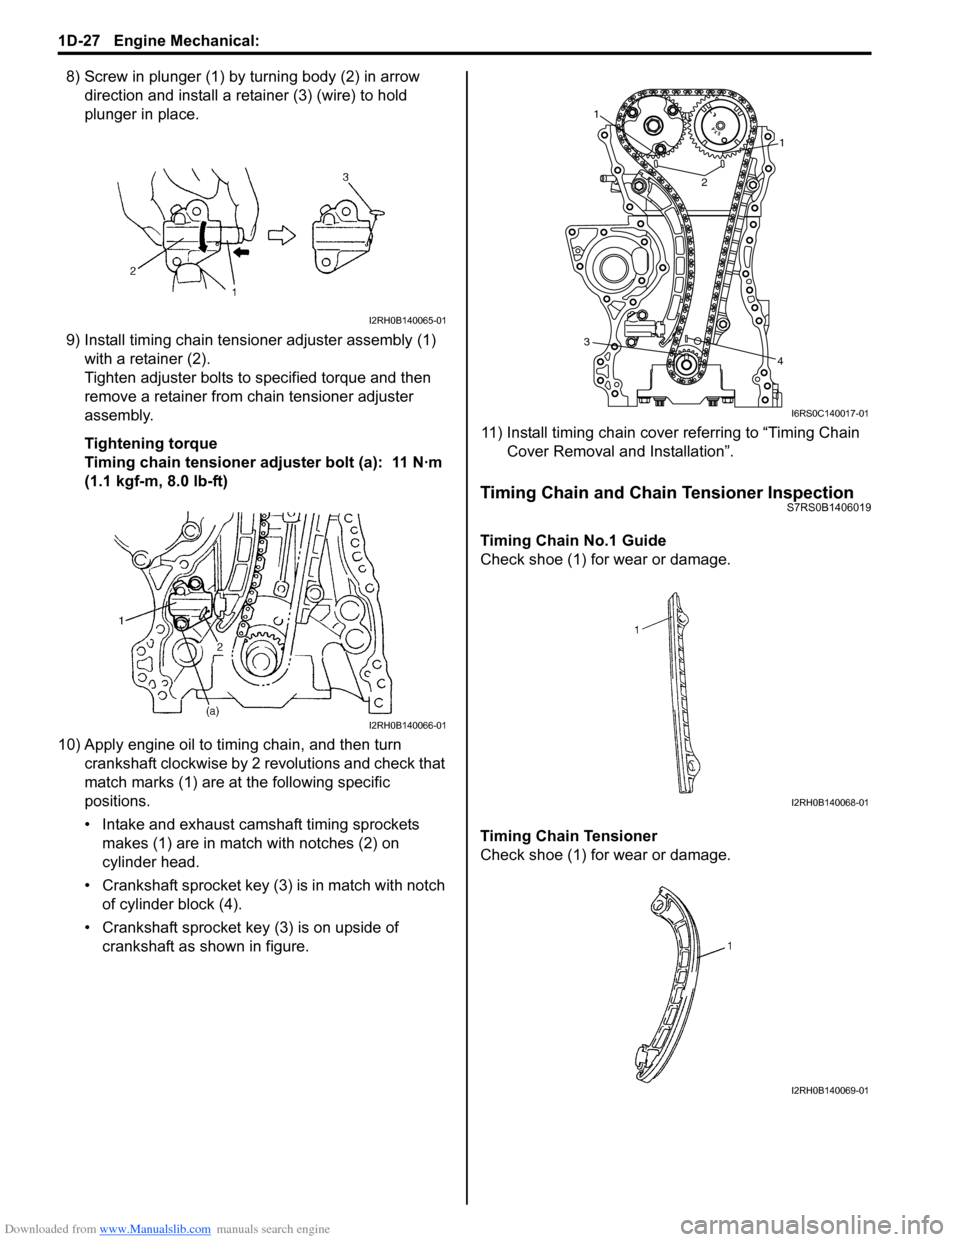 SUZUKI SWIFT 2008 2.G Service Owners Guide Downloaded from www.Manualslib.com manuals search engine 1D-27 Engine Mechanical: 
8) Screw in plunger (1) by turning body (2) in arrow direction and install a reta iner (3) (wire) to hold 
plunger in